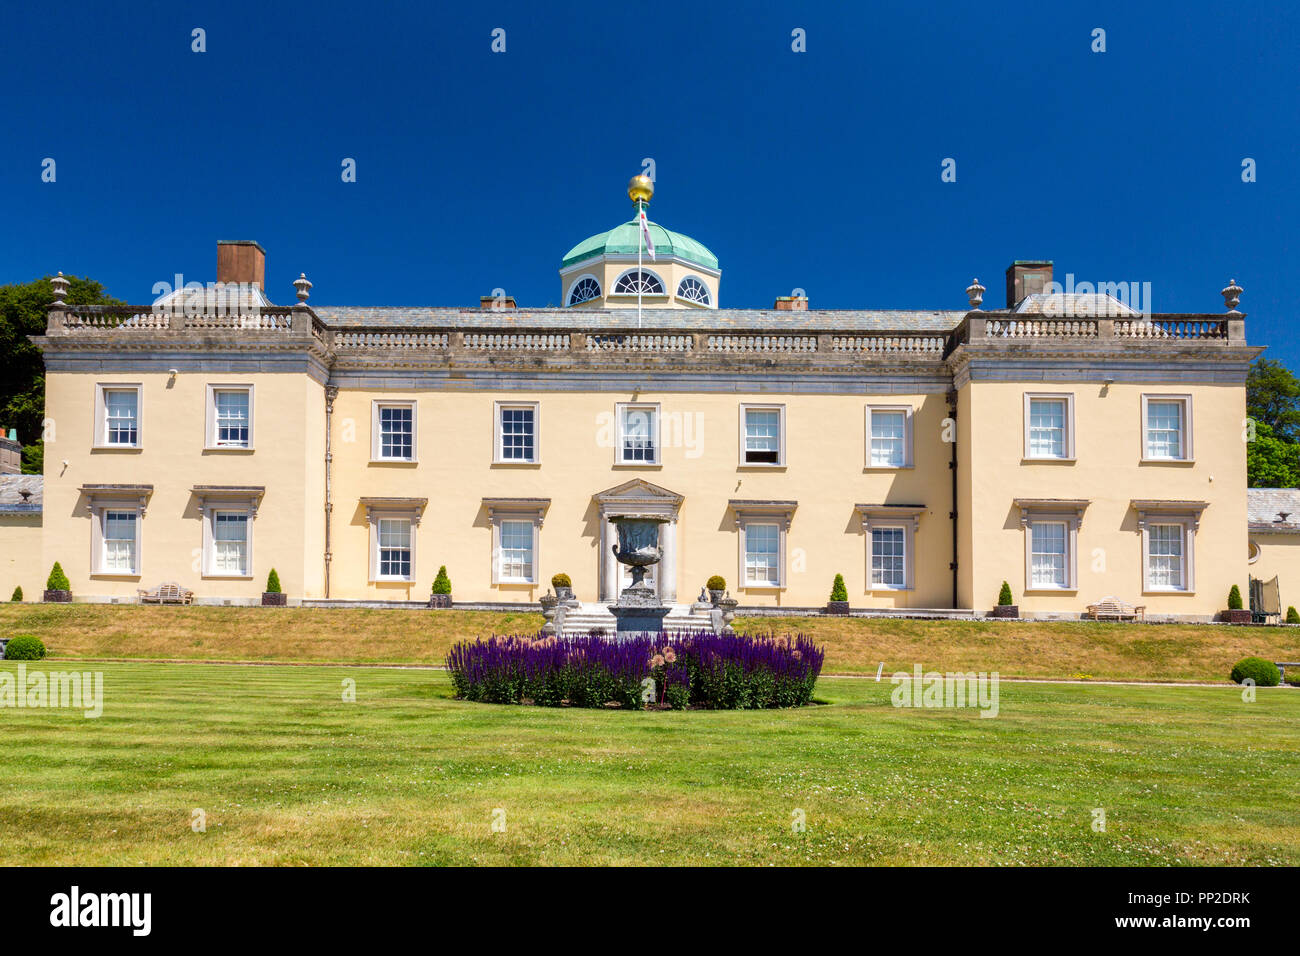 Impressive Palladian architecture and colourful planting at Castle Hill House and Gardens, near Filleigh, Devon, England, UK Stock Photo